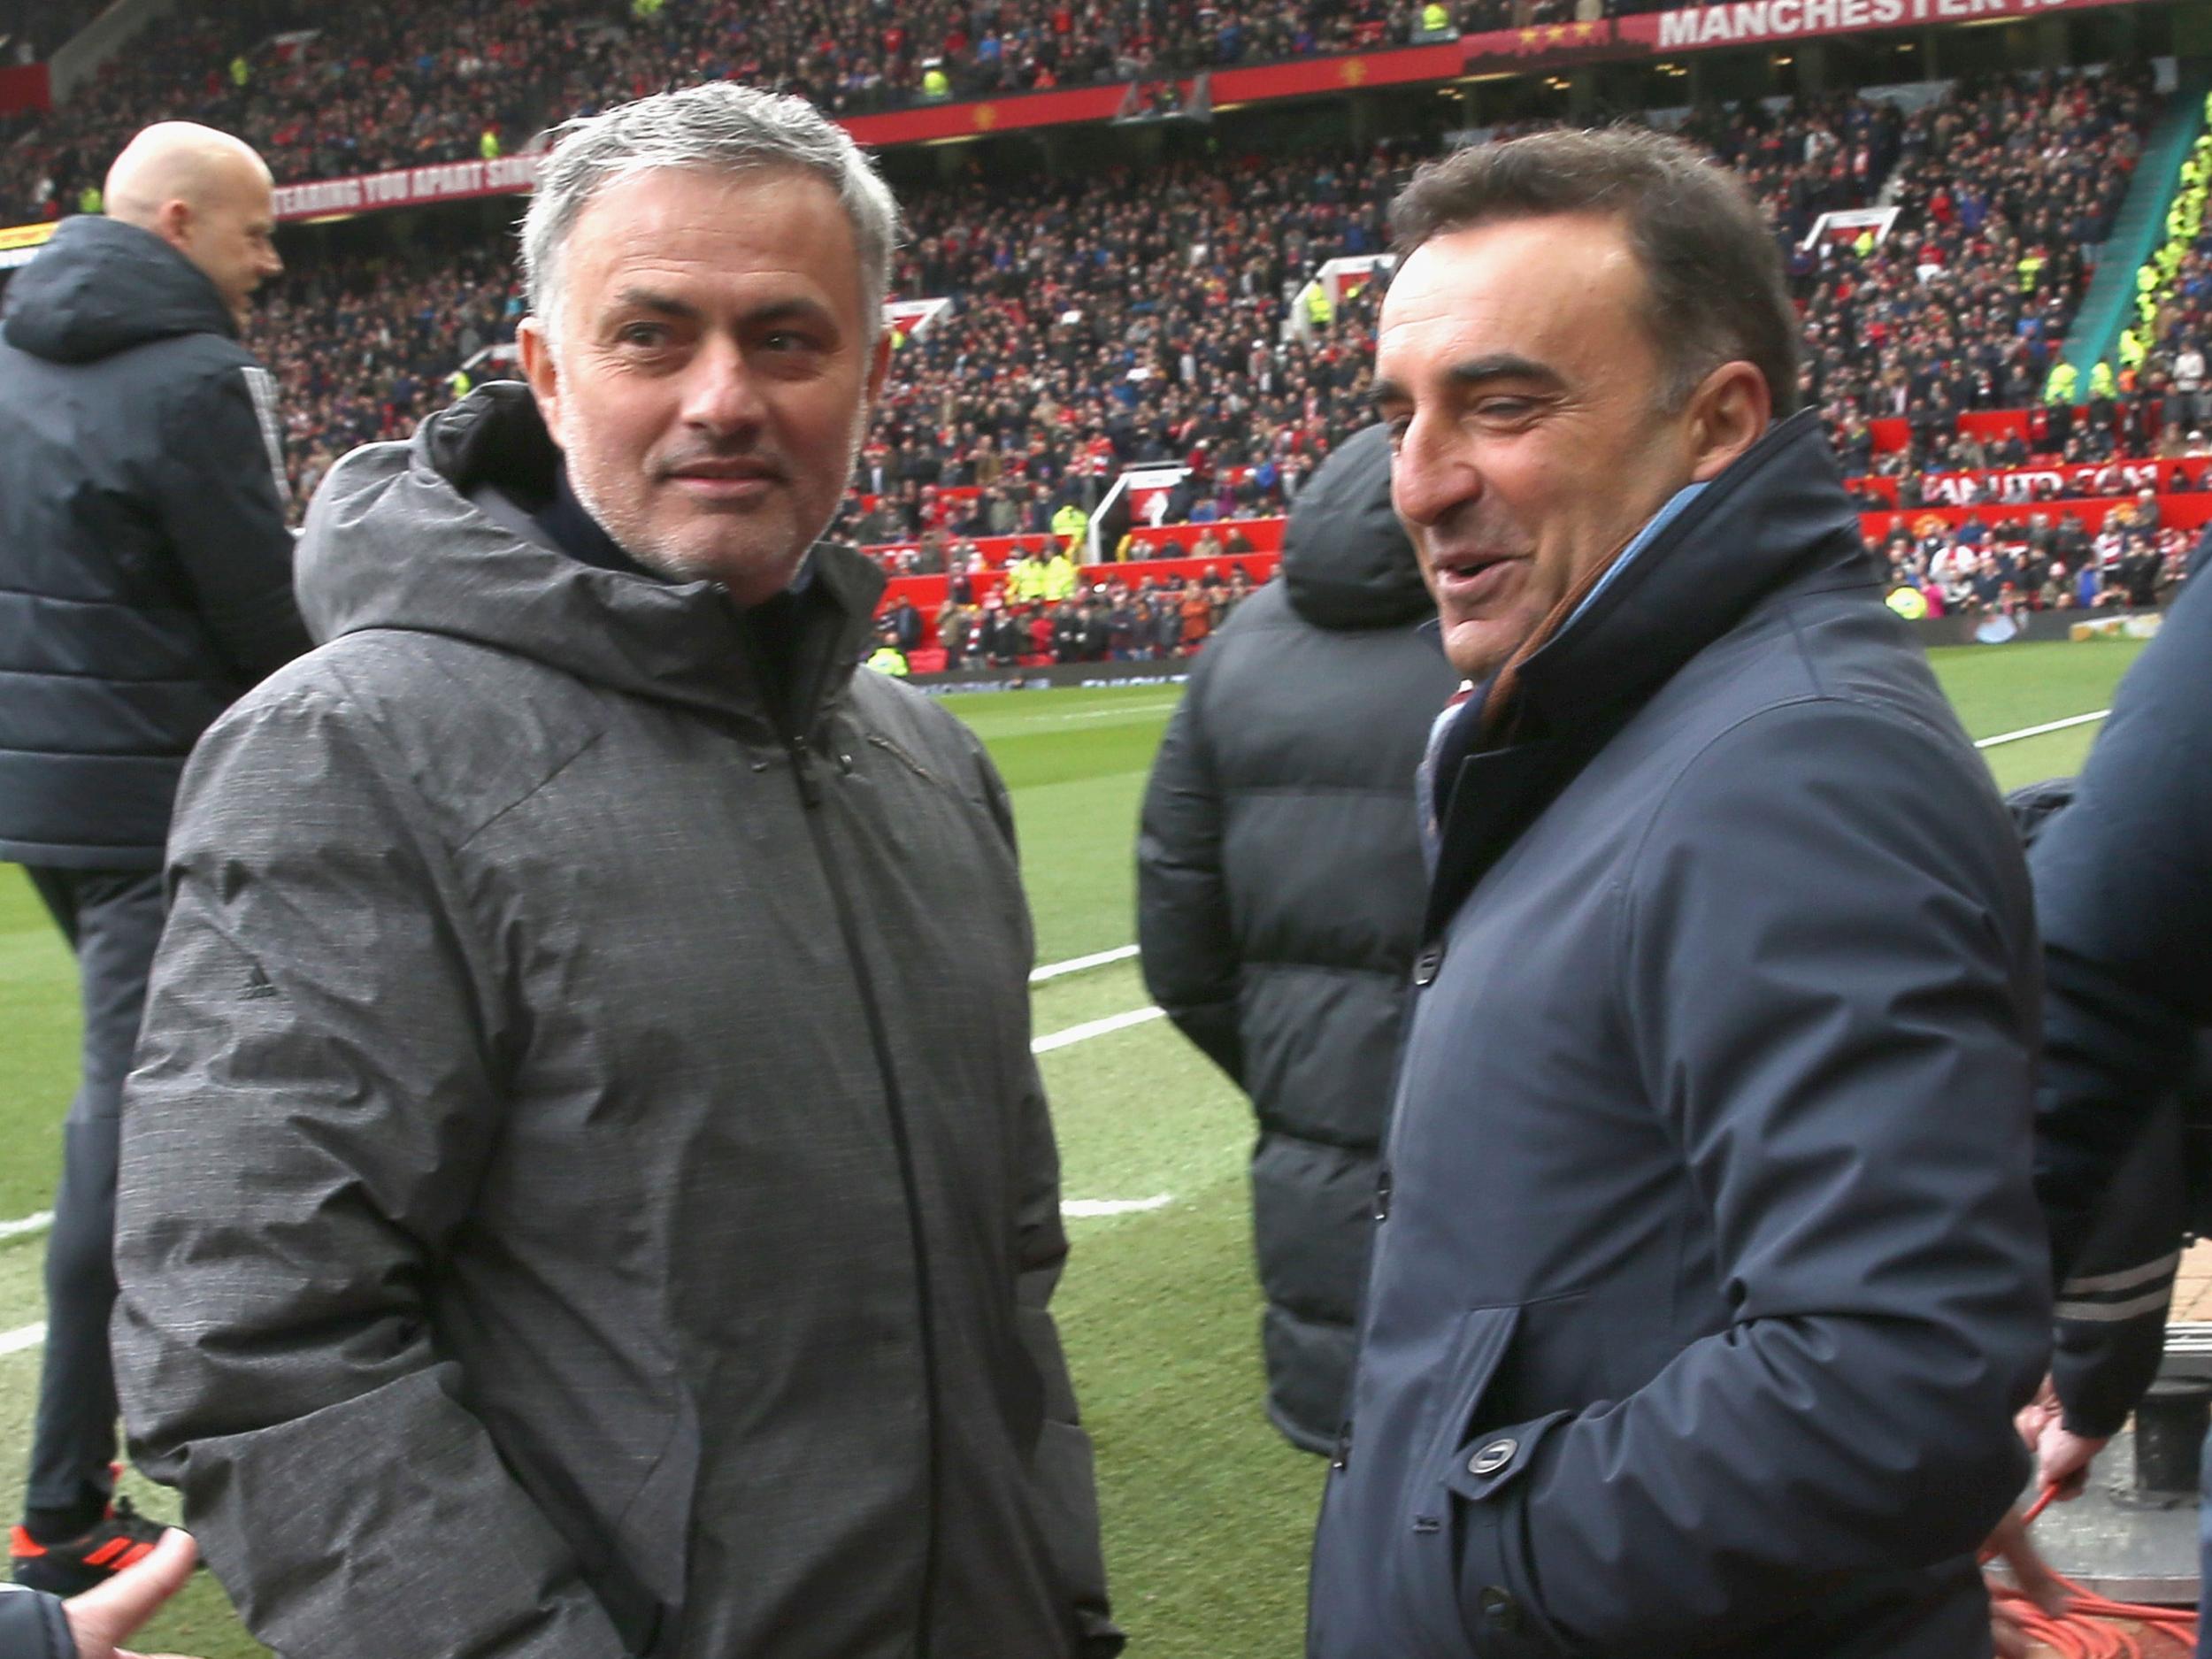 Carlos Carvalhal believes Jose Mourinho will succeed at Old Trafford